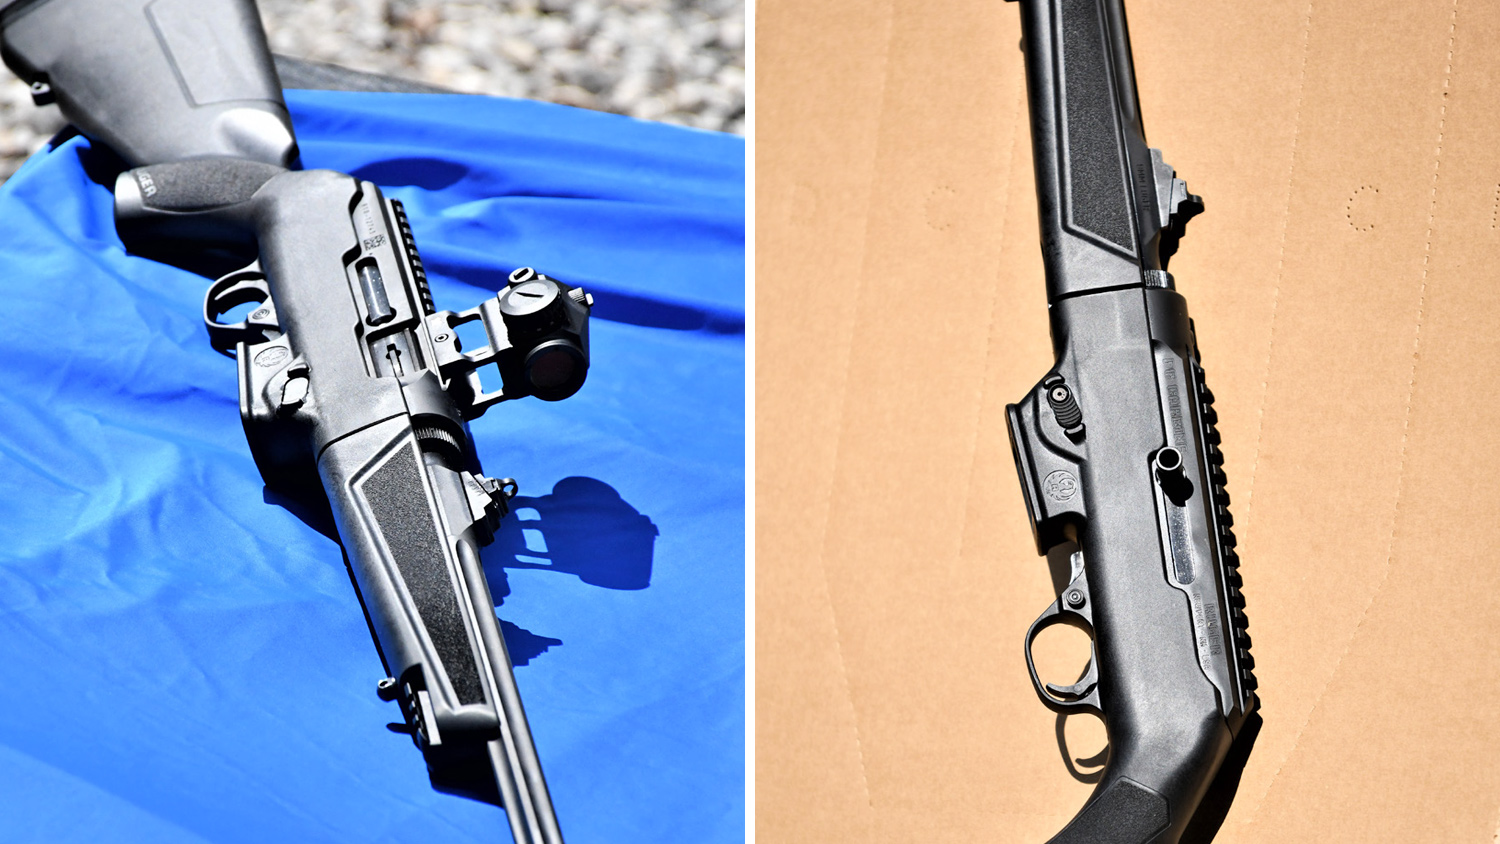 Both sides of the Ruger PC9 9mm carbine